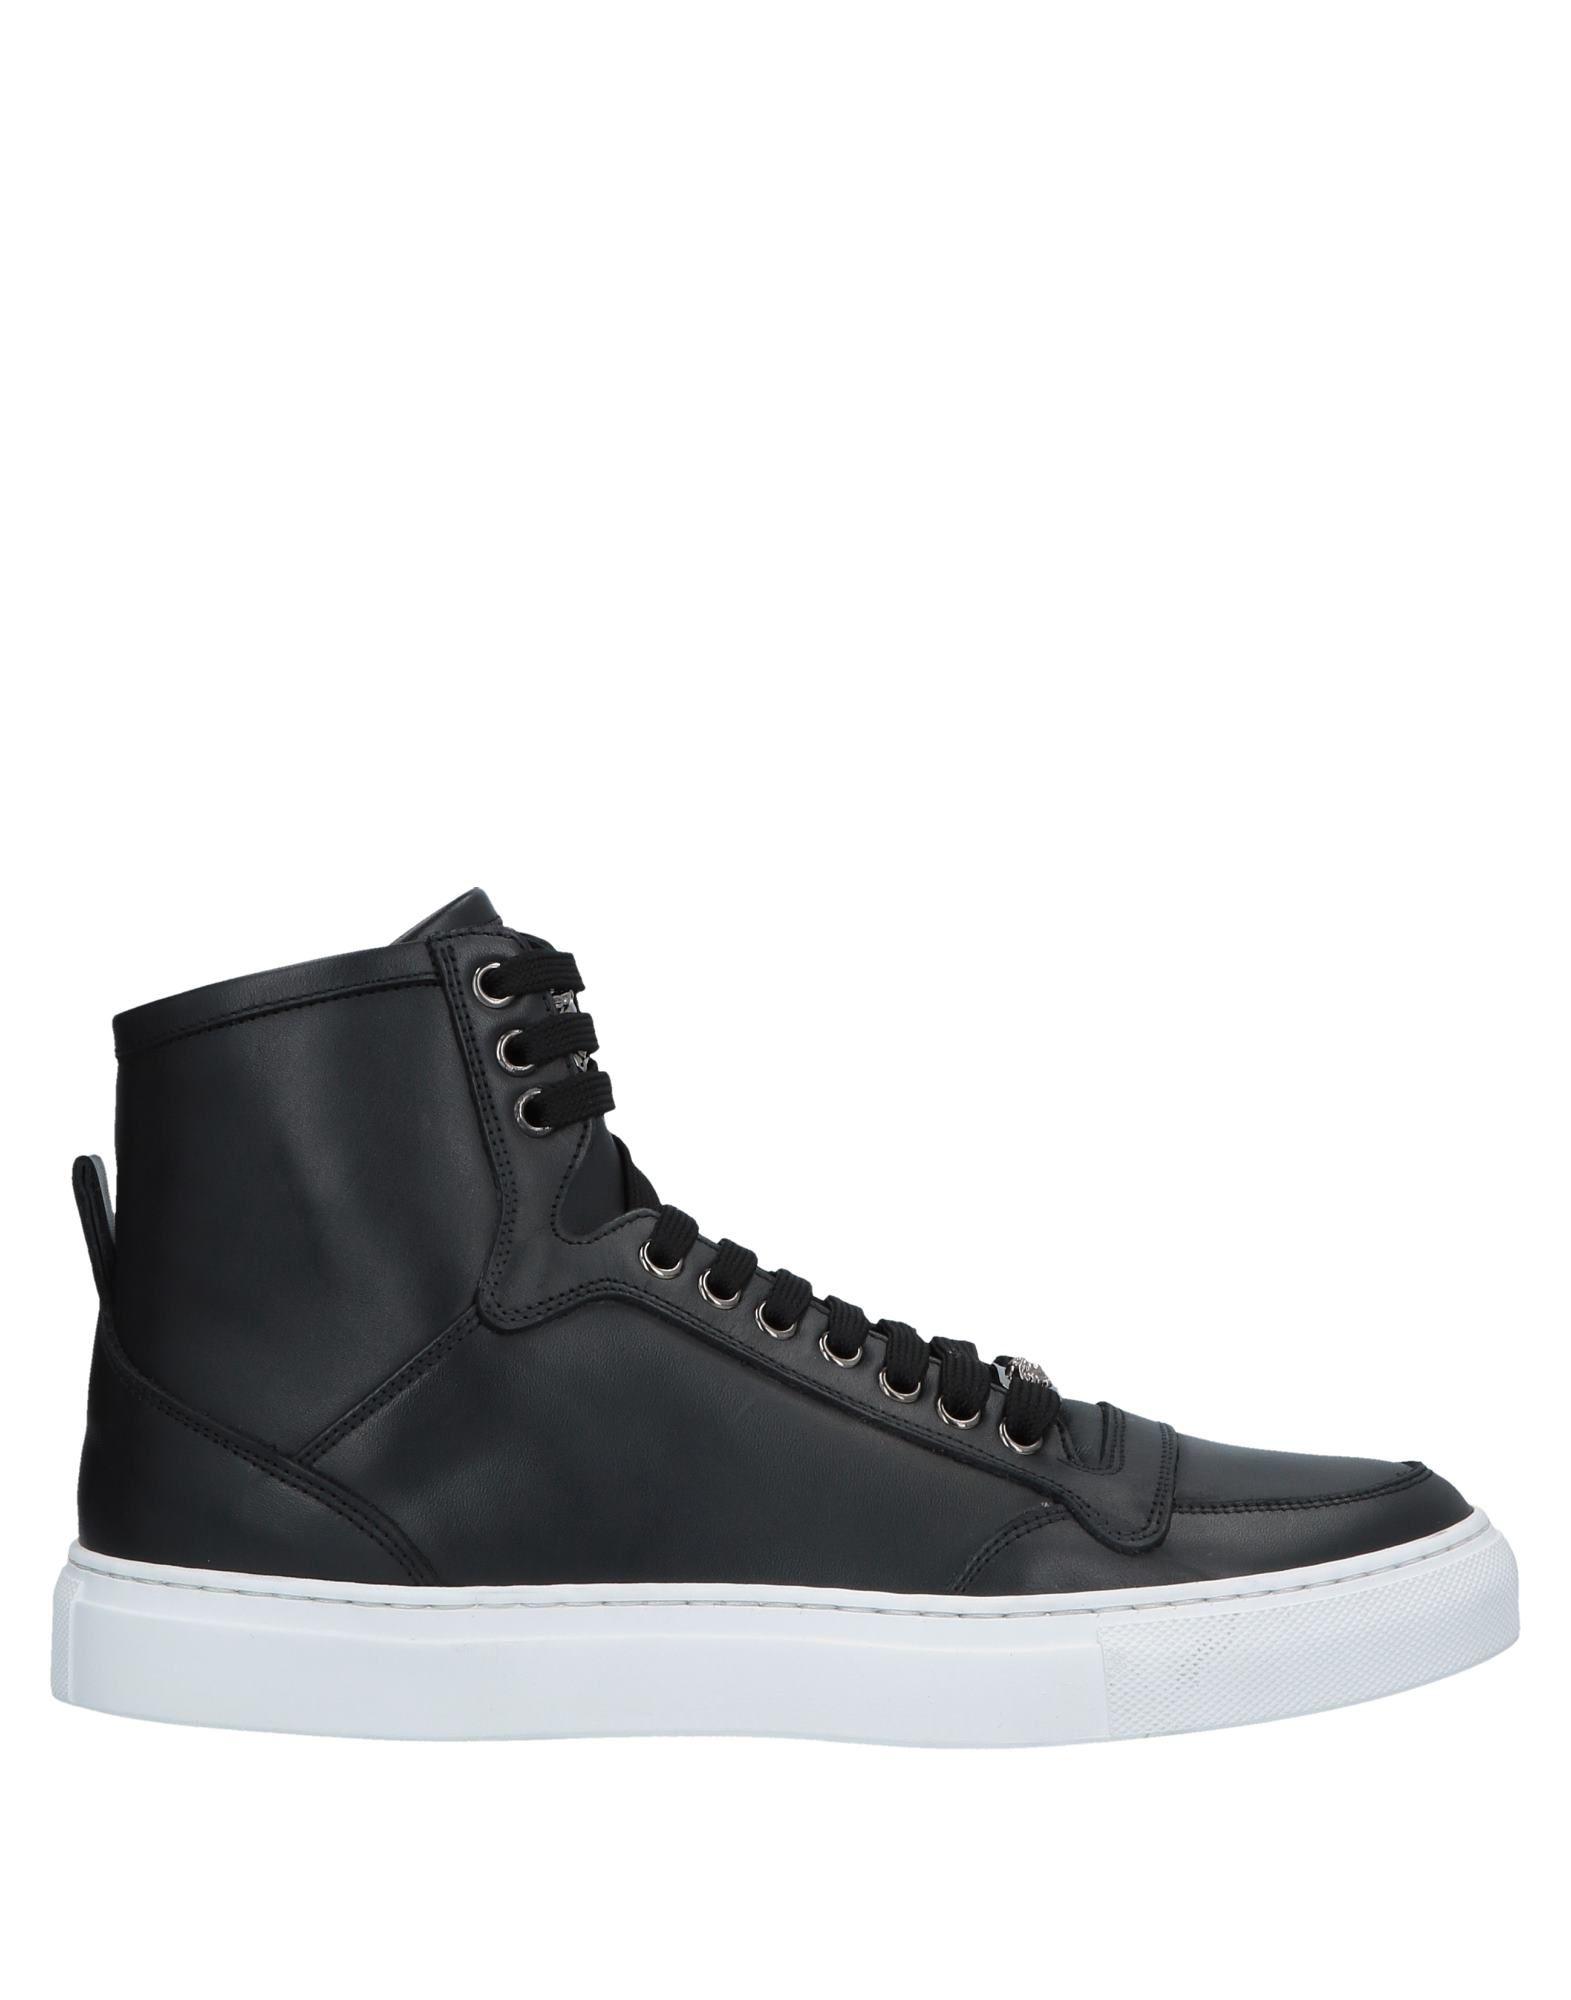 Versace Leather High-tops & Sneakers in Black for Men - Lyst